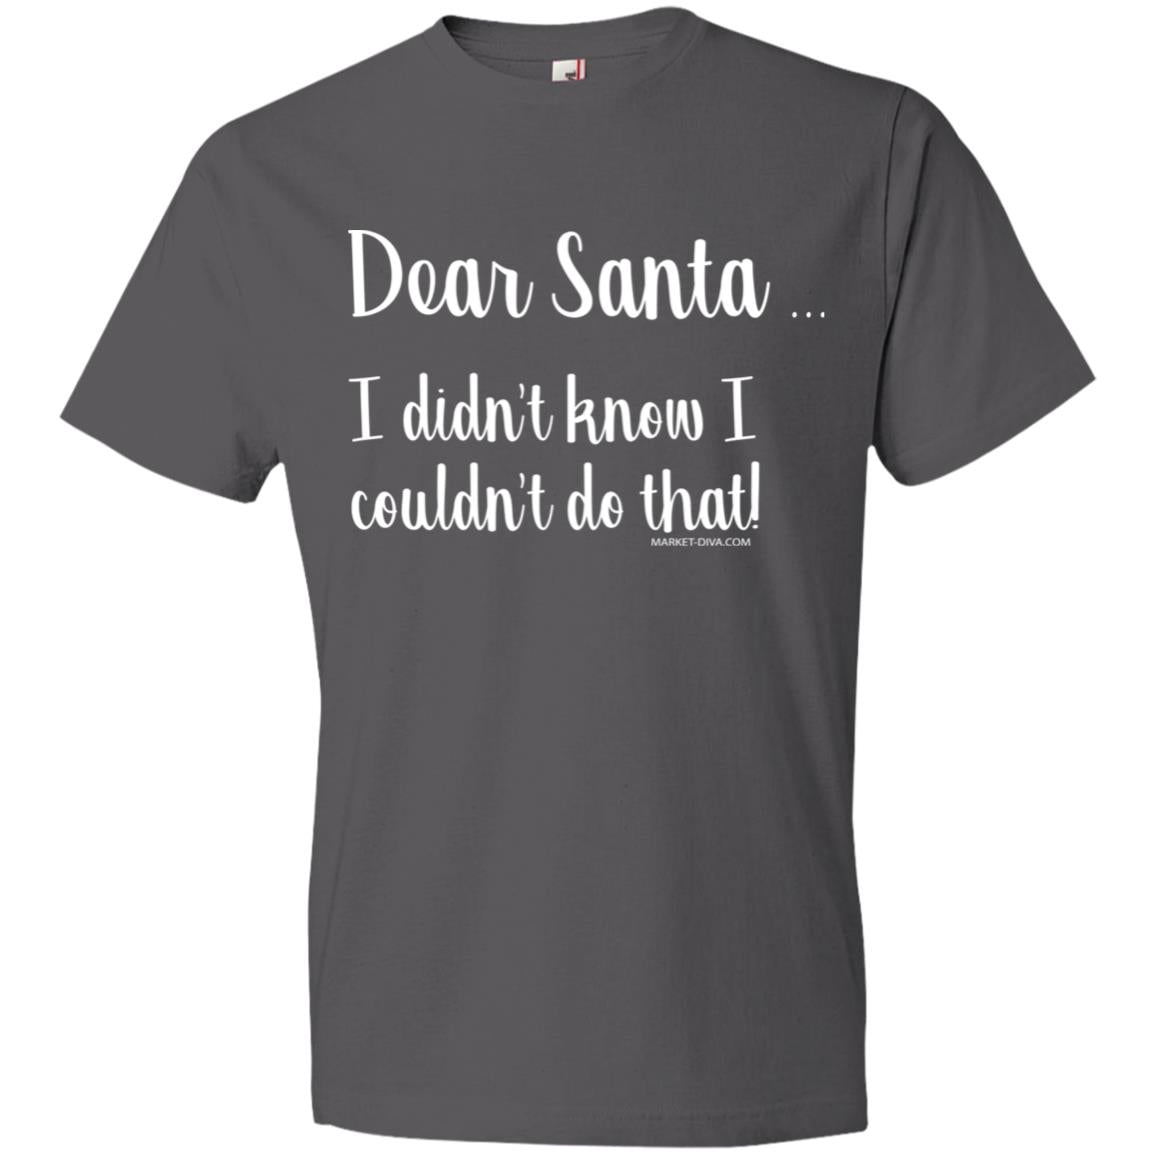 Christmas: Dear Santa - Didn't Know I couldn't do that